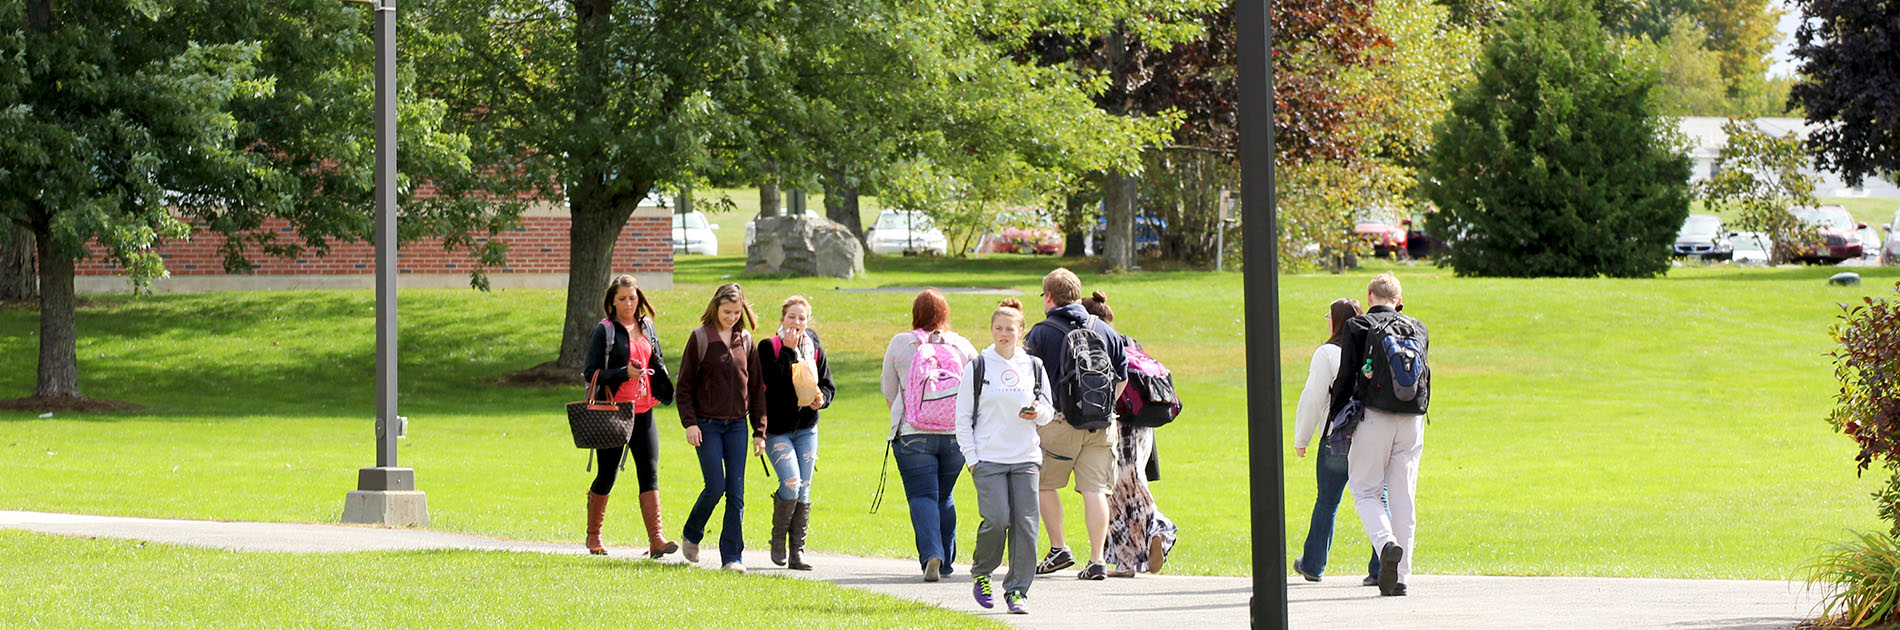 Students walking on campus of Husson University